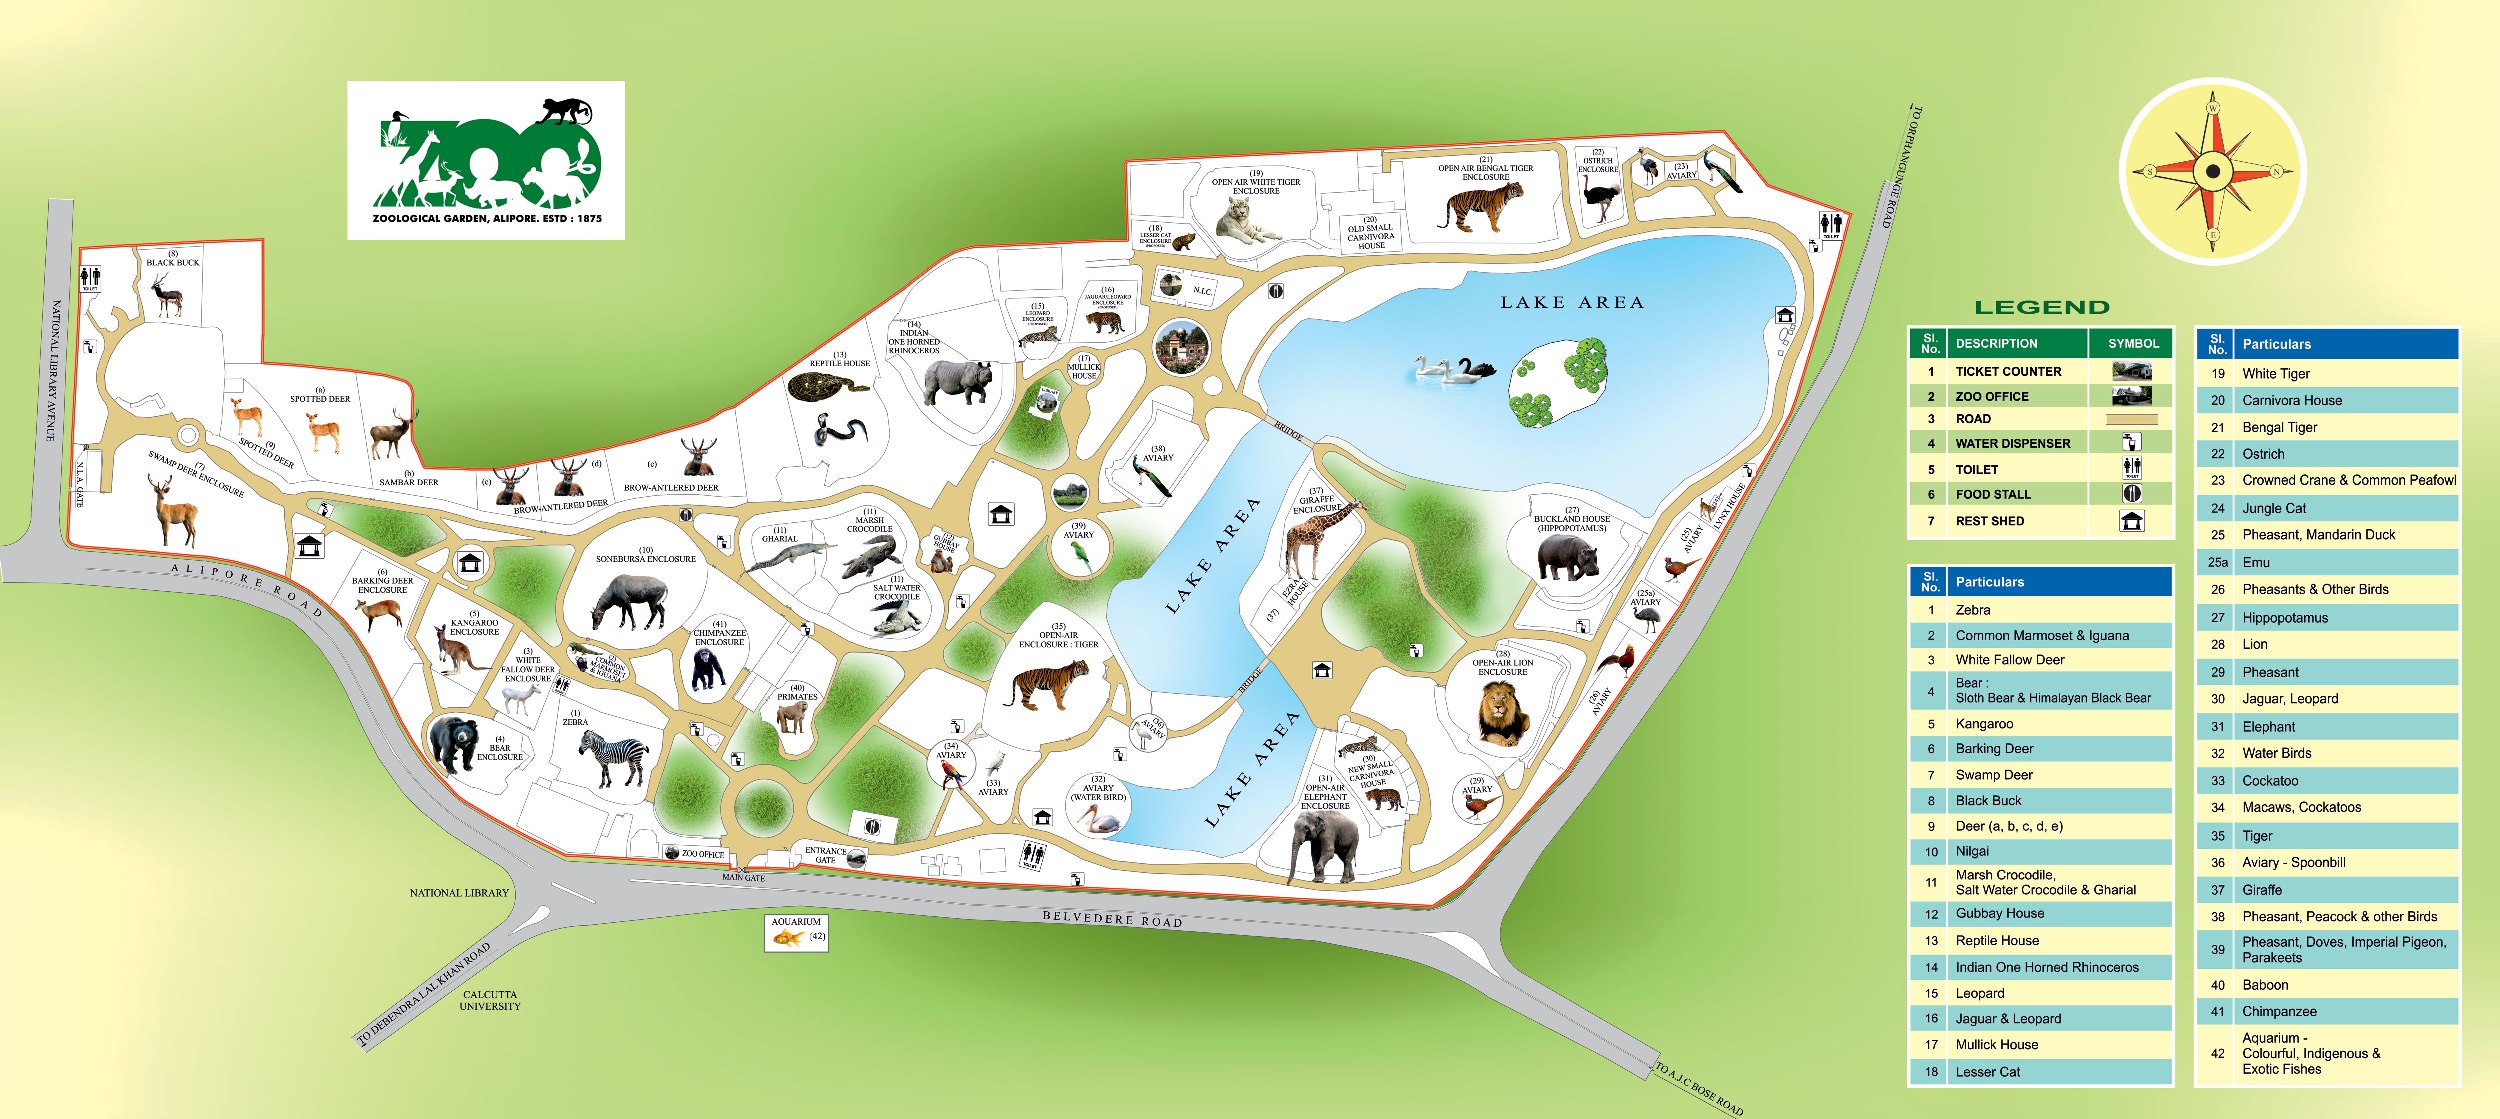 Alipore Zoo Map displays Ticket counter, zoo office, road, water dispenser, toilet, food stalls, sheds, etc.